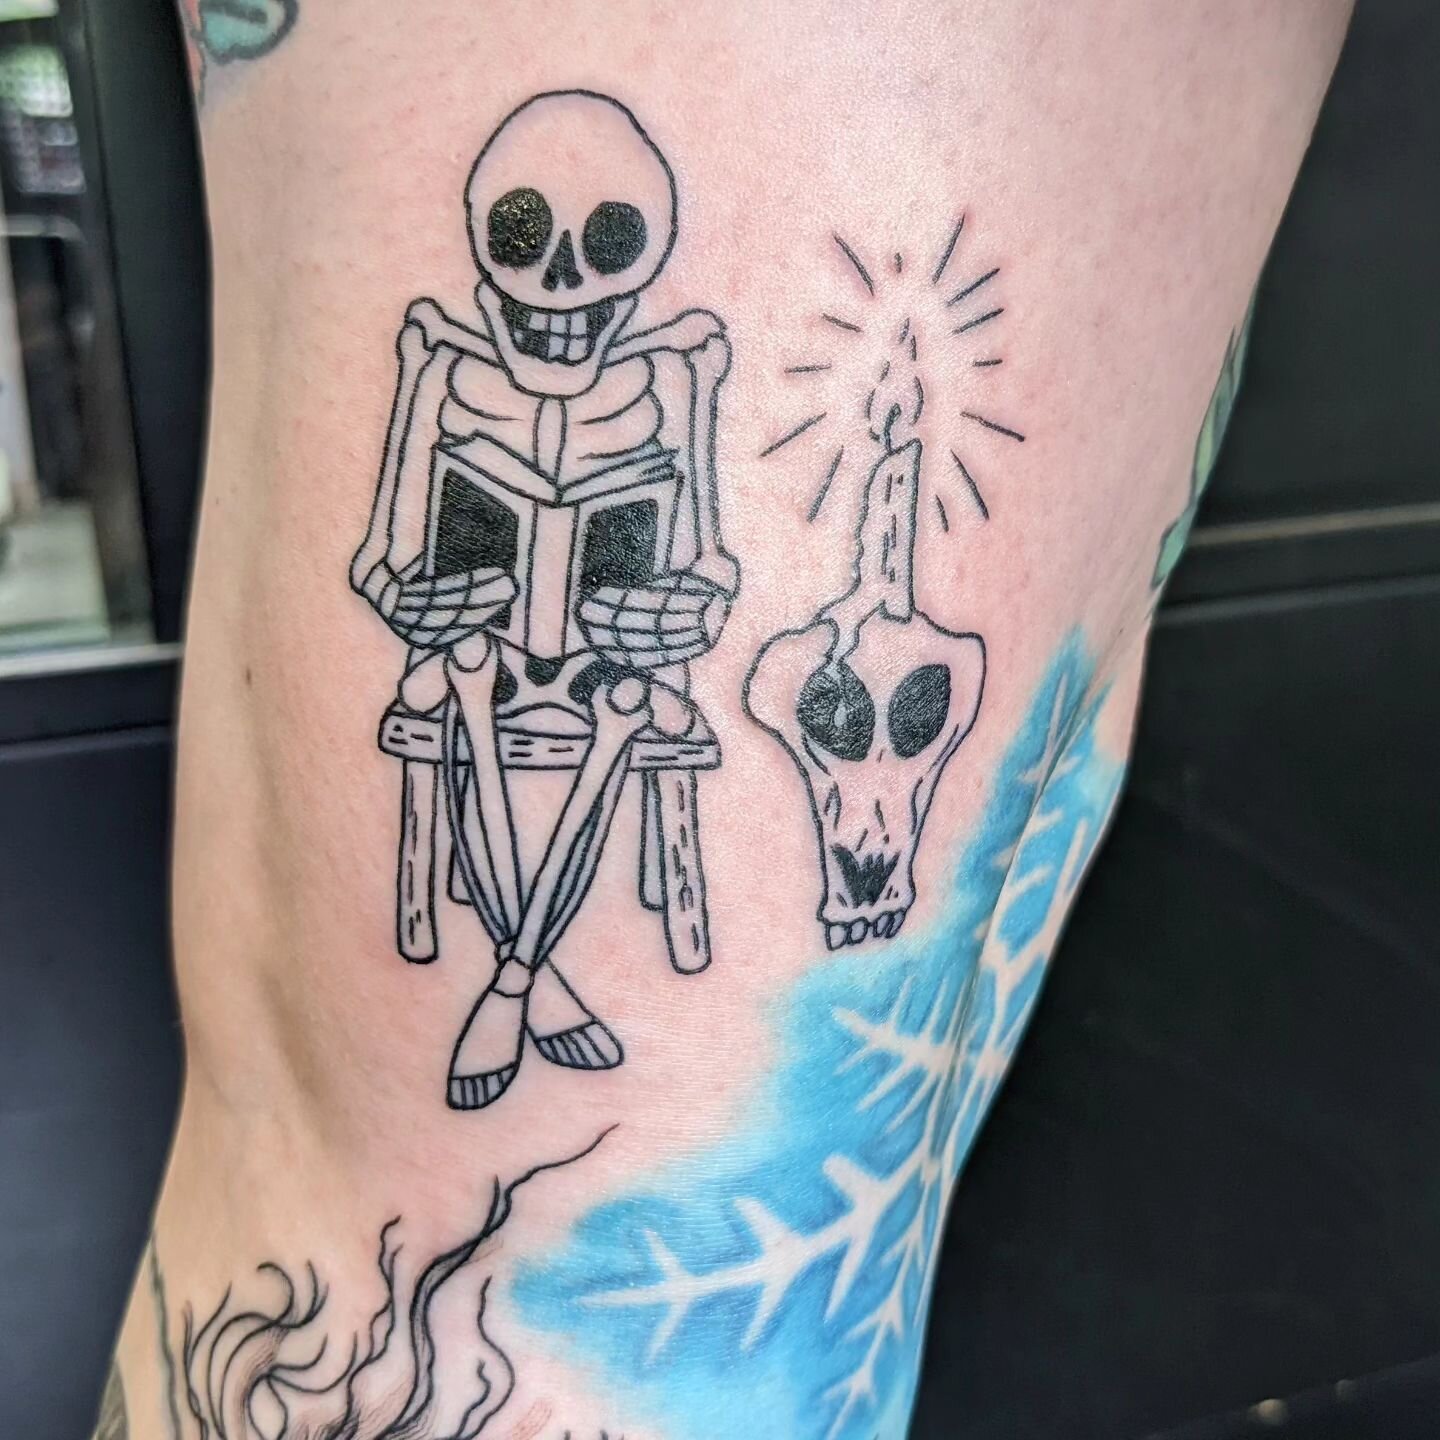 A whole leg full of awesome gap fillers from the book &quot;In A Dark, Dark Room; And Other Scary Stories,&quot; from July '22. Thank you again, Miss P! 

.
.
.
.
.

#tattoos #gapfillertattoo #inadarkdarkroom #thegreenribbon #scarystories #horrortatt